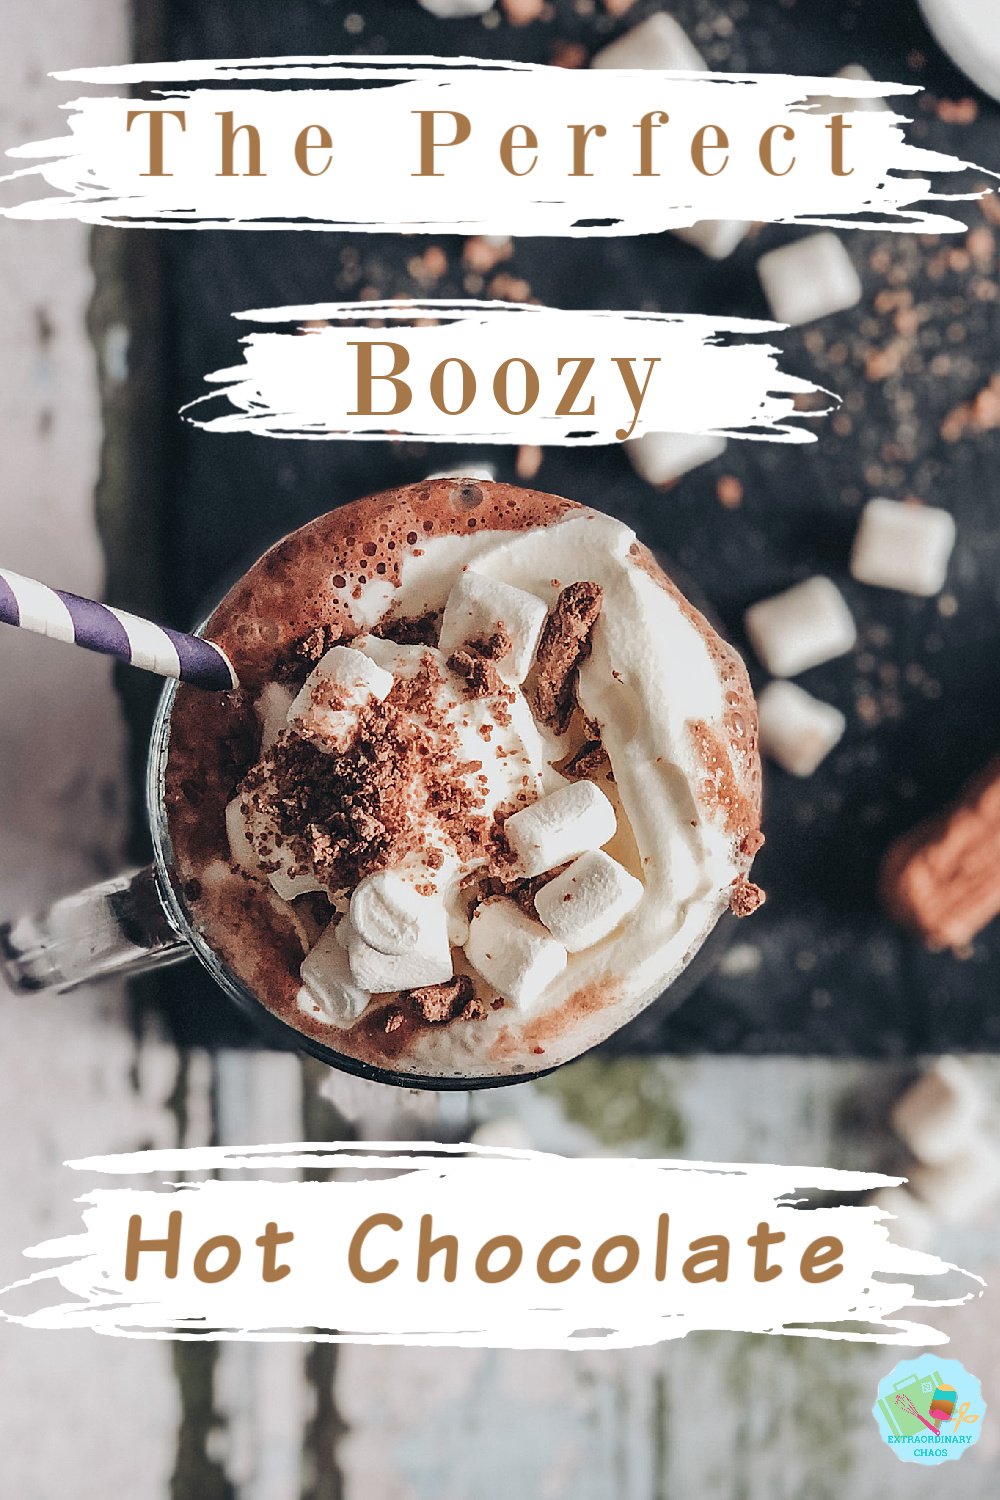 How to make the perfect boozy hot chocolate for cold winters days, winter parties and evenings by the fire, hot chocolate with Moose Spirit topped with cream, marshmallows and crushed flake